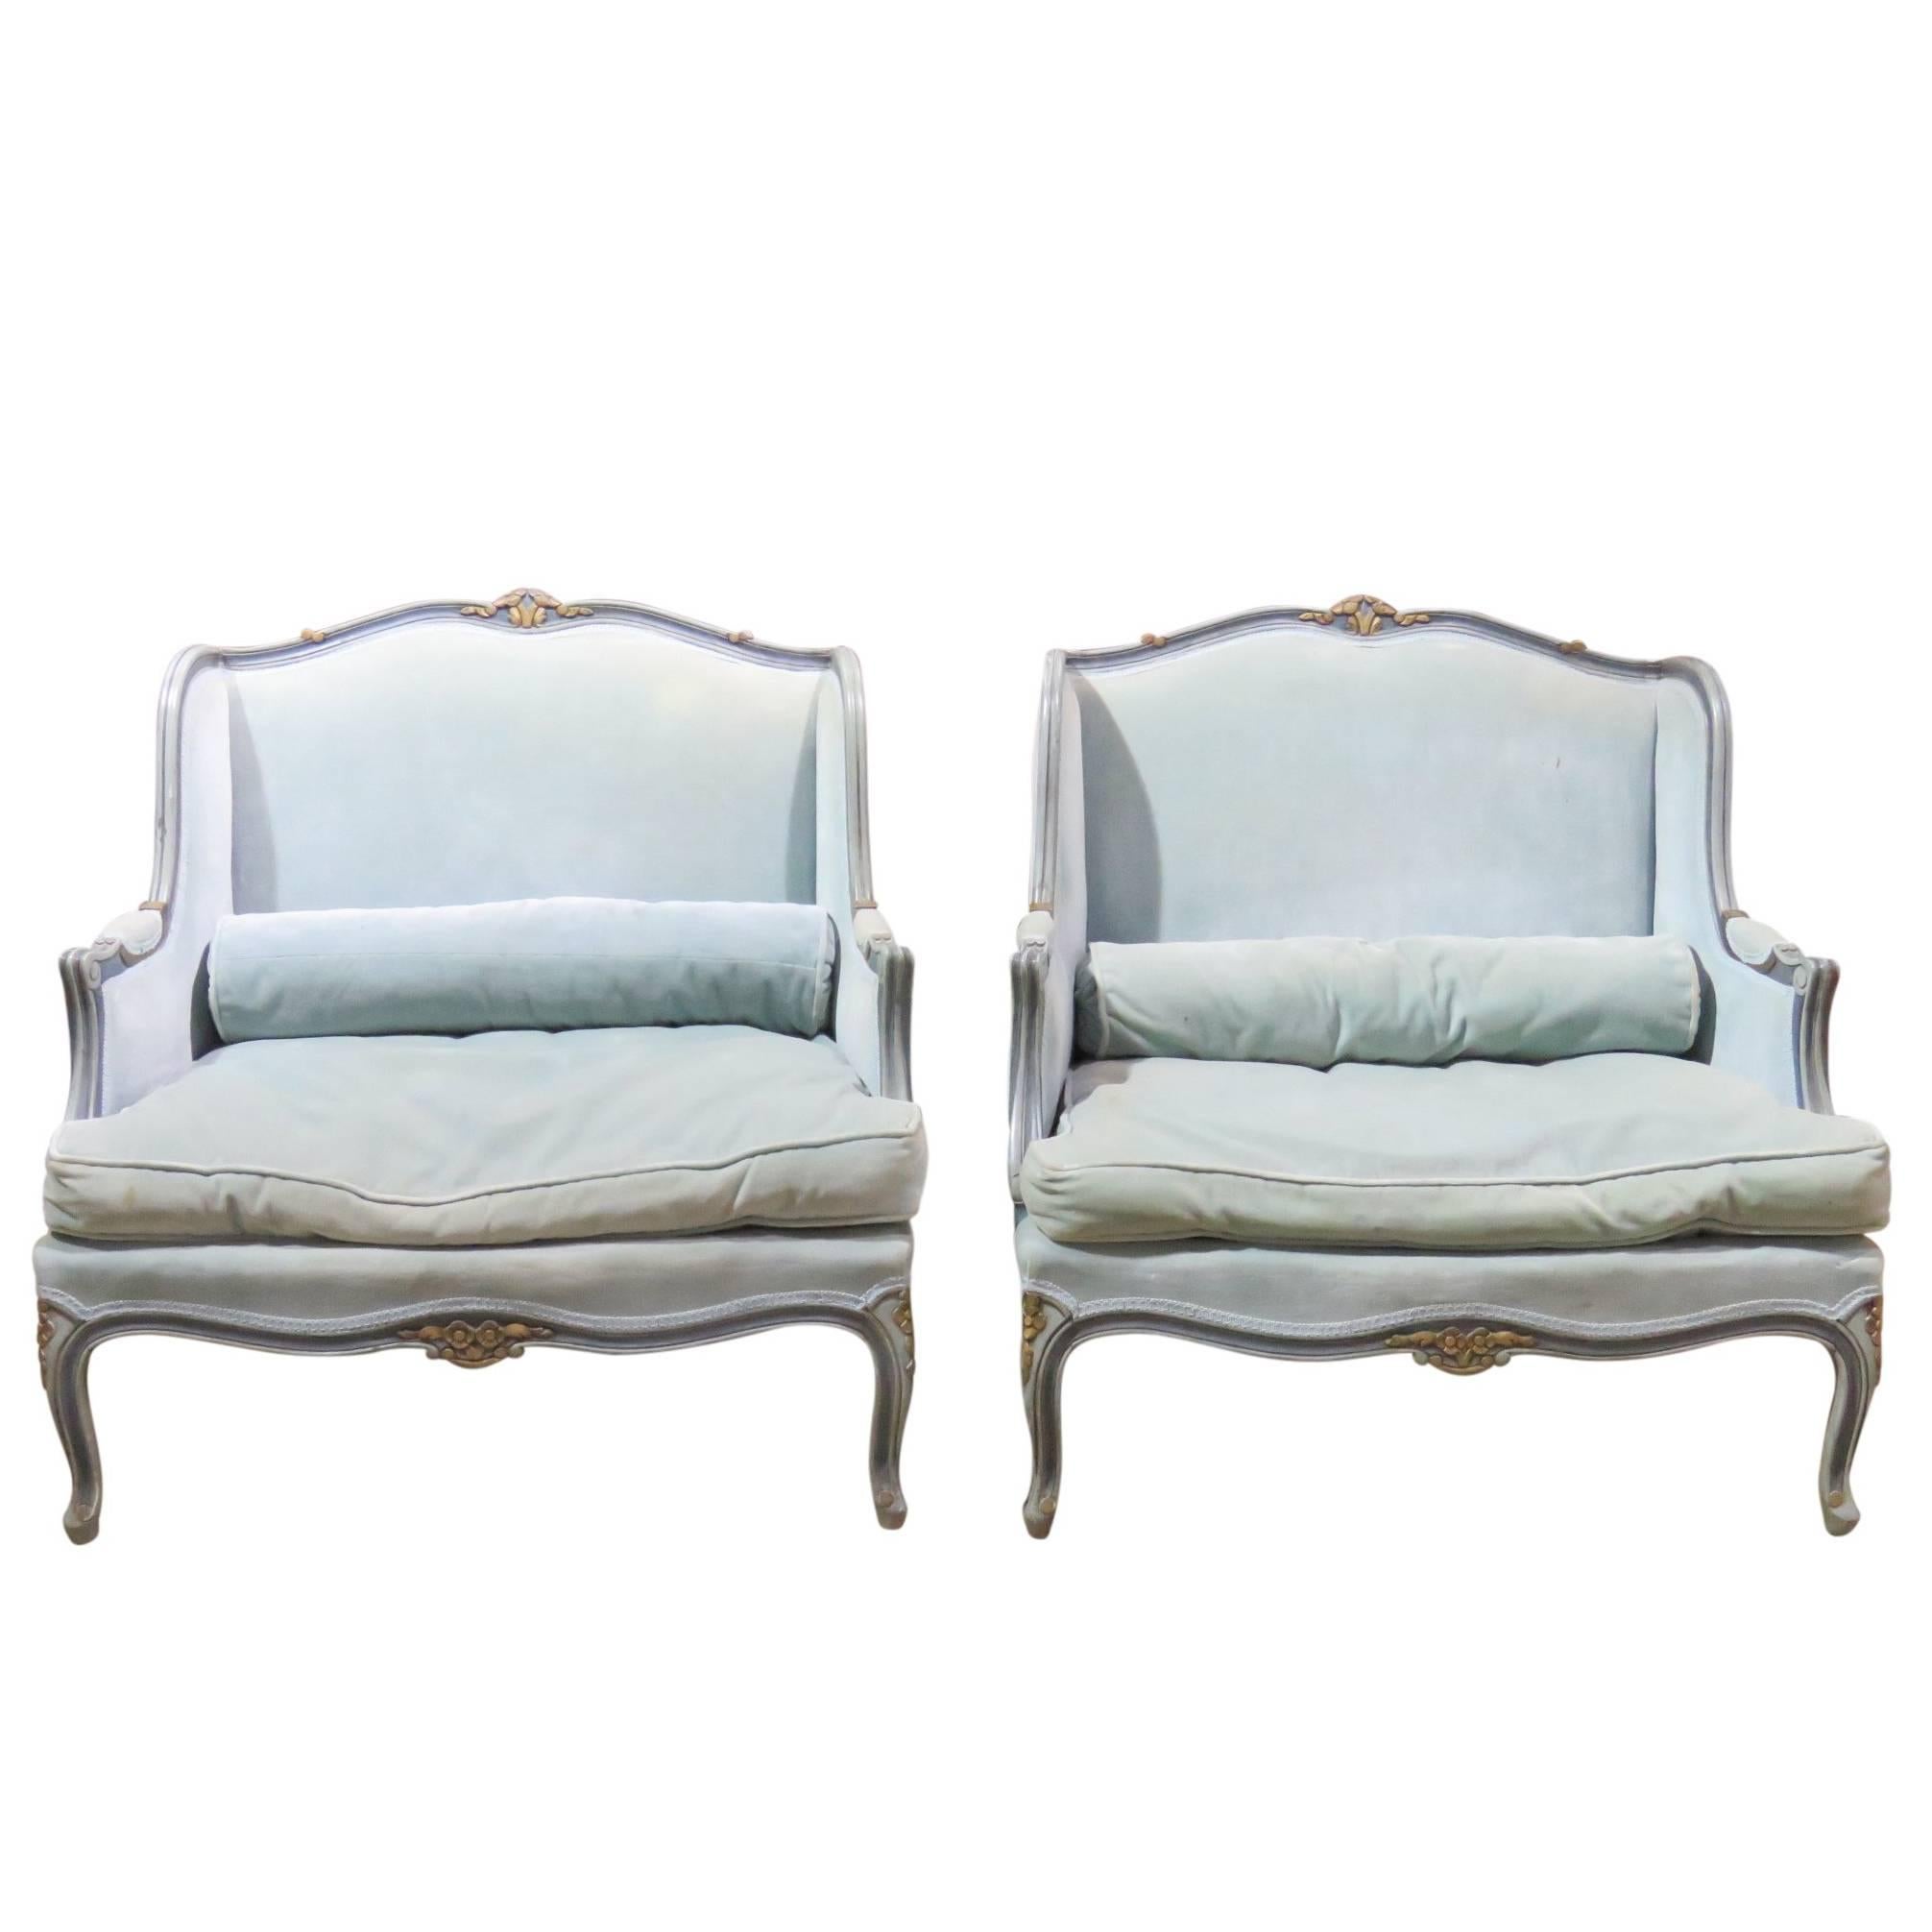 Pair of Louis XVI Style Turquoise Painted and Gilt Oversized Lounge Chairs